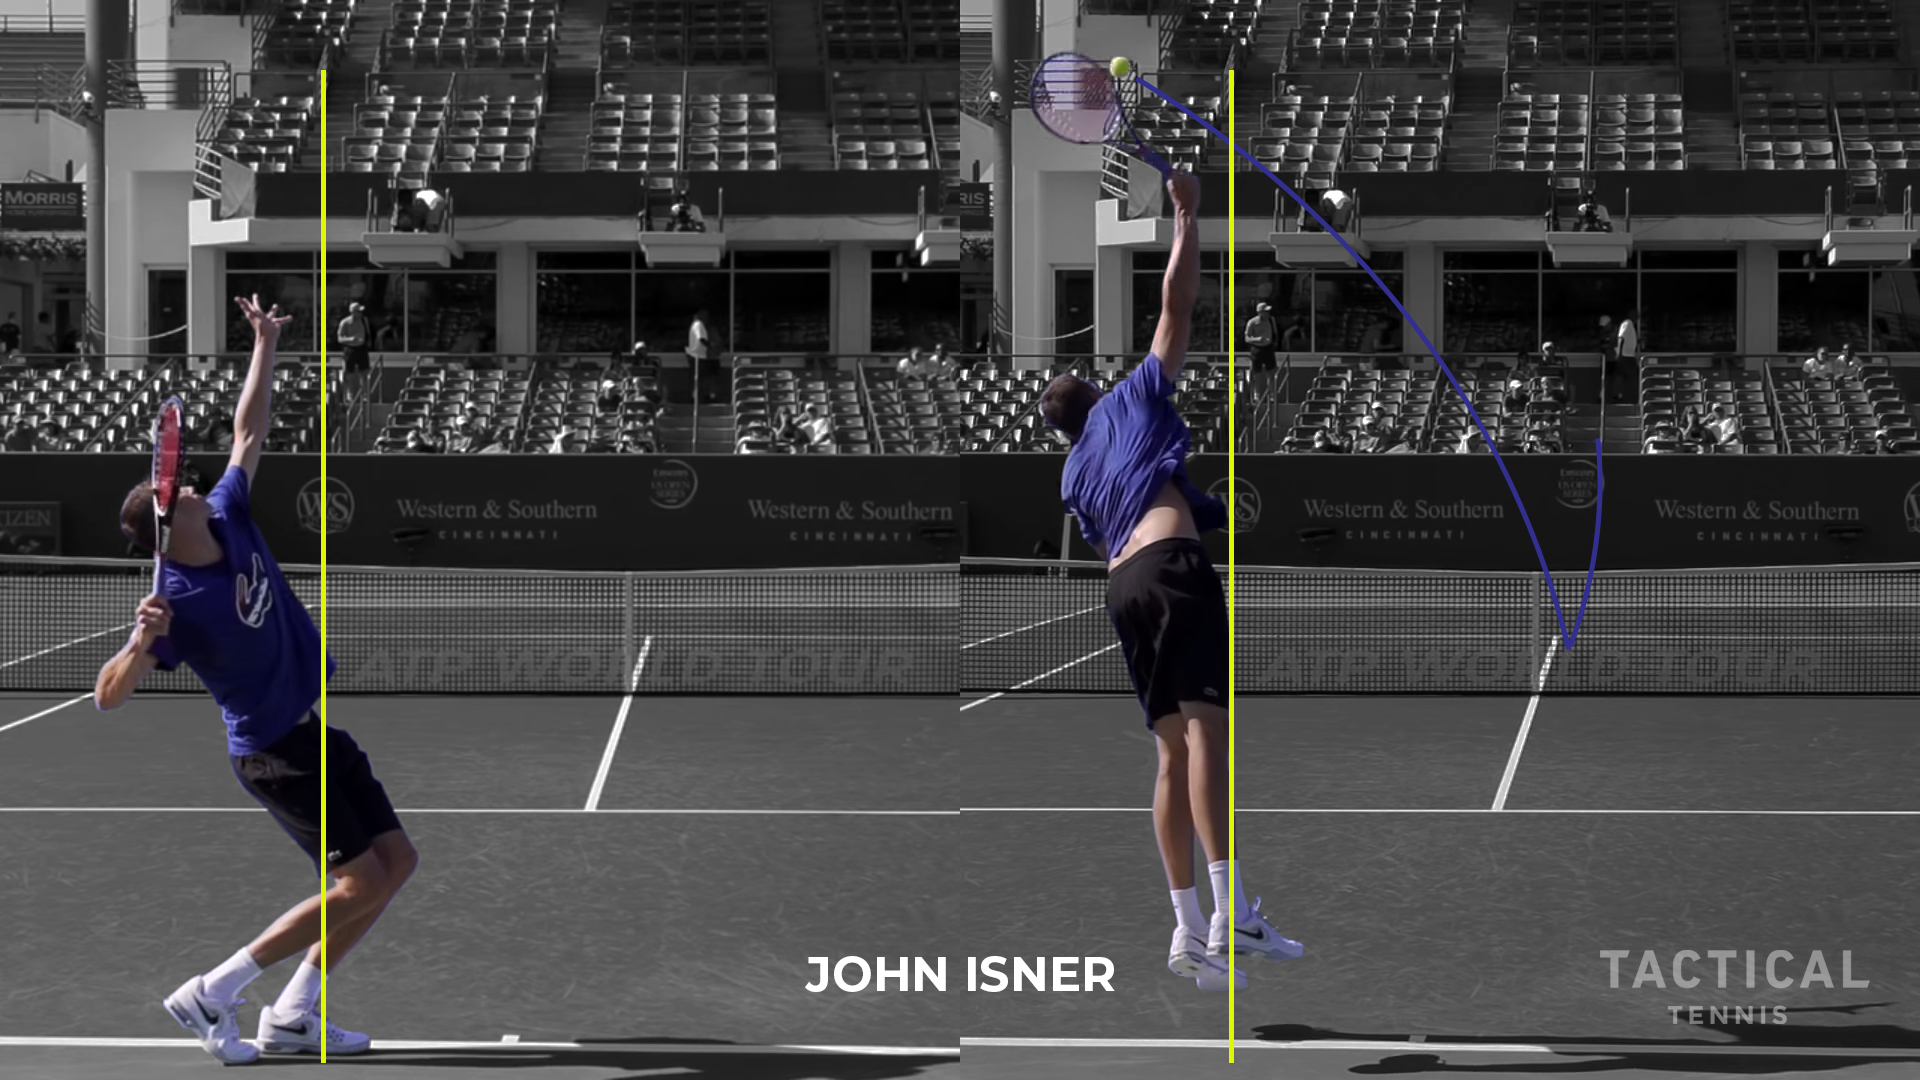 John Isner serve at contact relative to trophy position